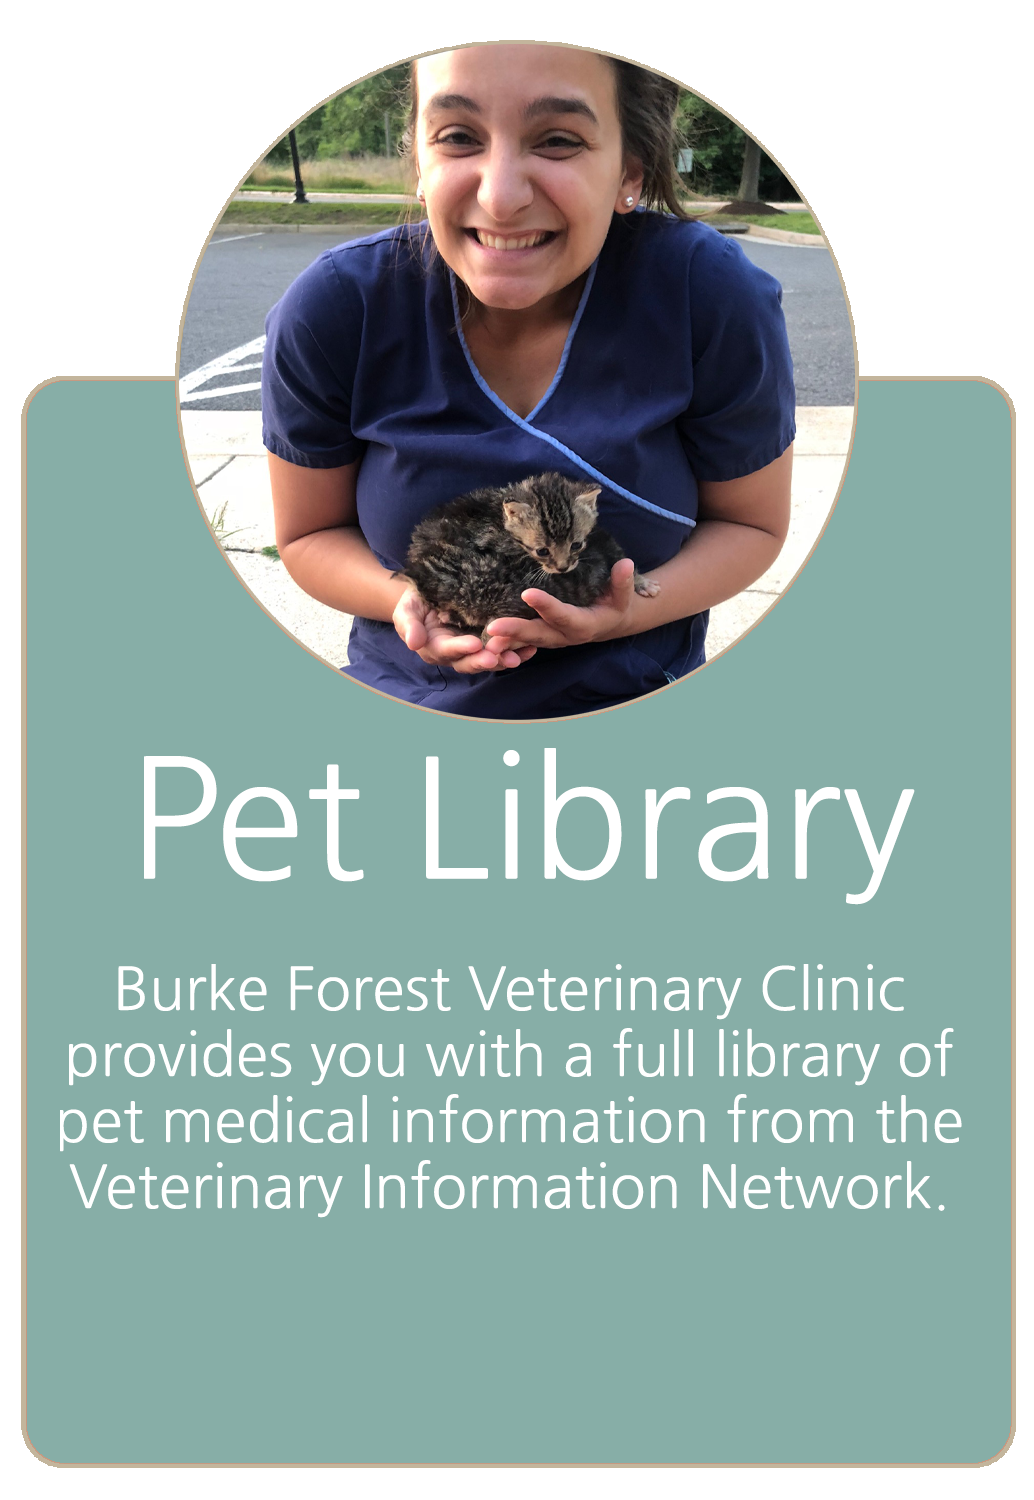 Pet Library Button